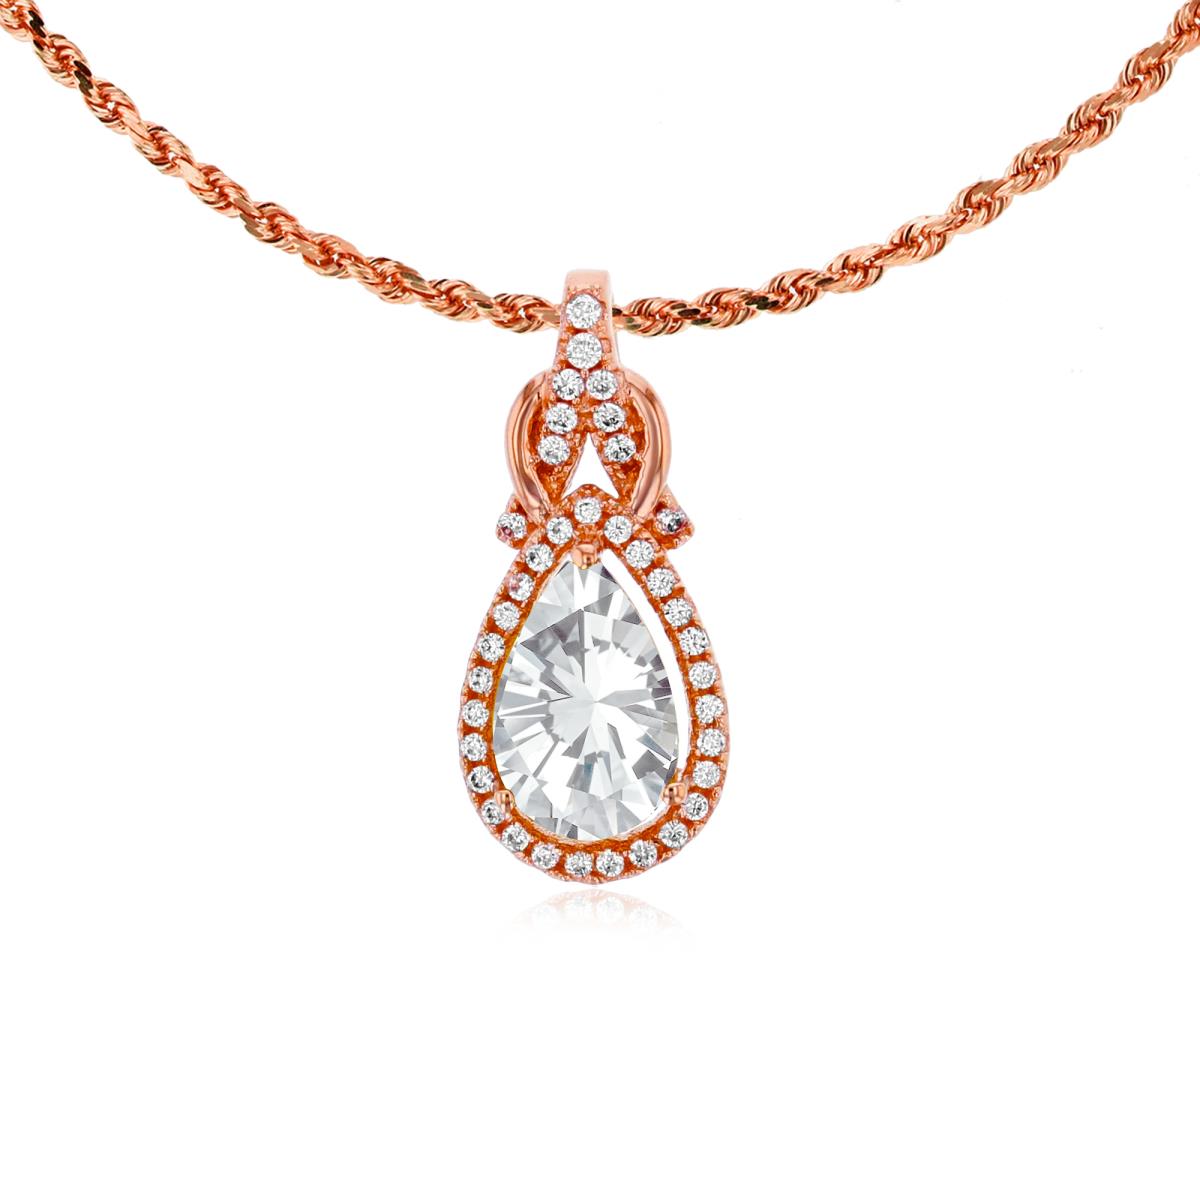 10K Rose Gold 8x5mm Pear Cut White Topaz & 0.11 CTTW Rnd Diamond Knot 18" Rope Chain Necklace